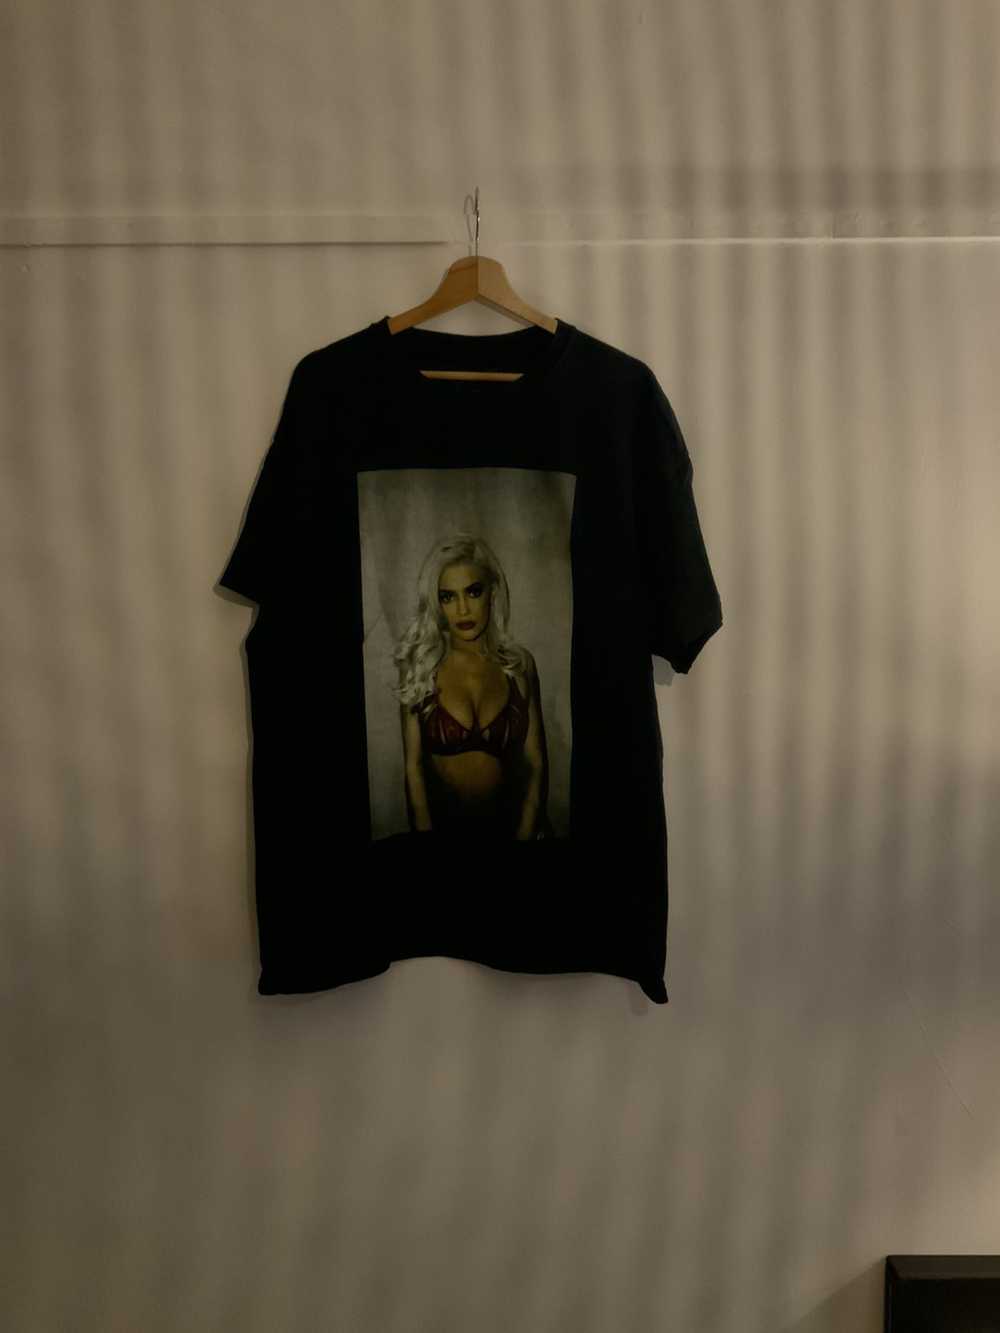 Kylie Cosmetics Kylie Jenner T-Shirt - image 3